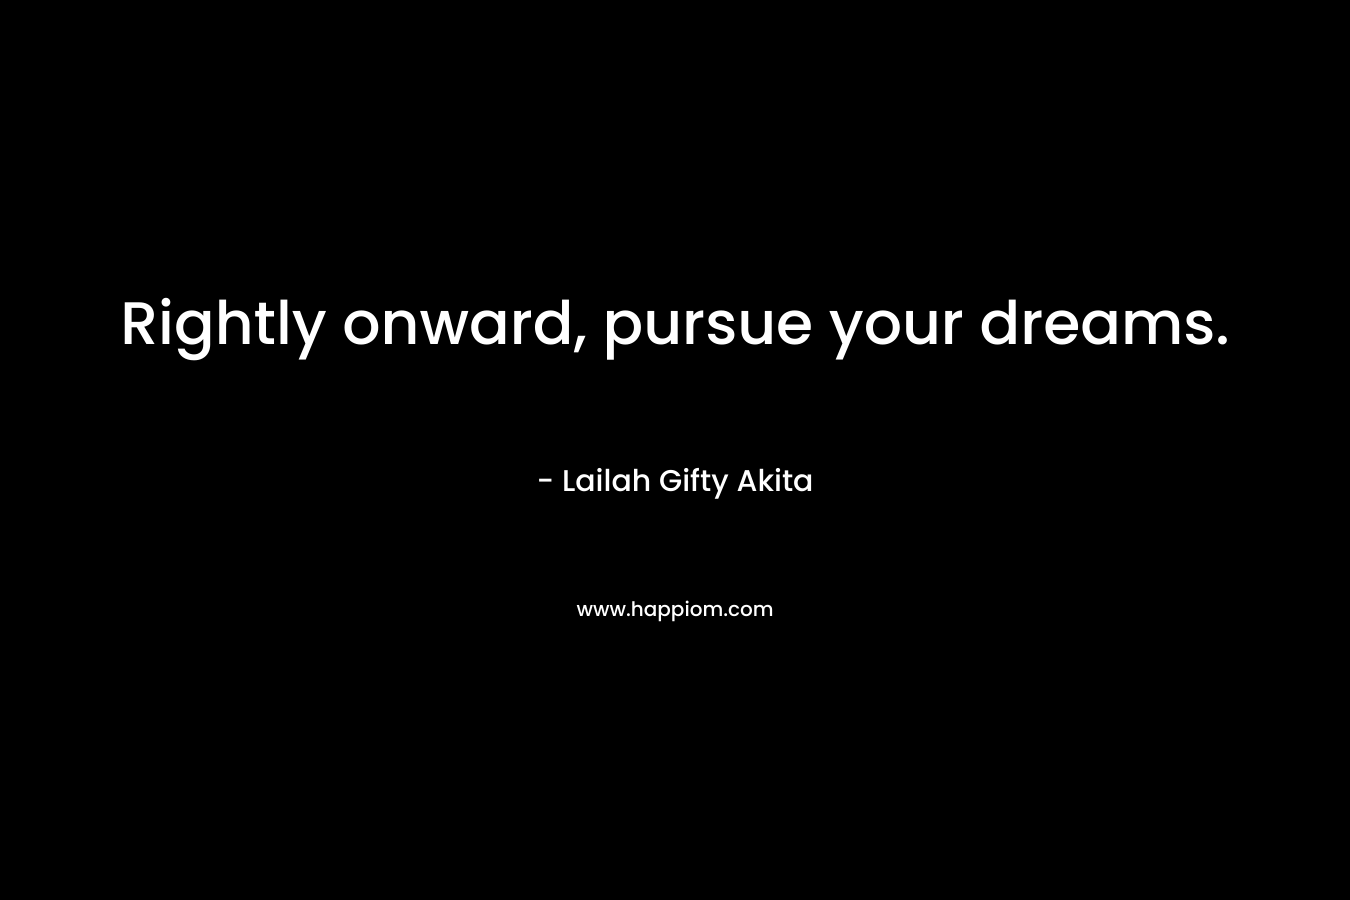 Rightly onward, pursue your dreams. – Lailah Gifty Akita